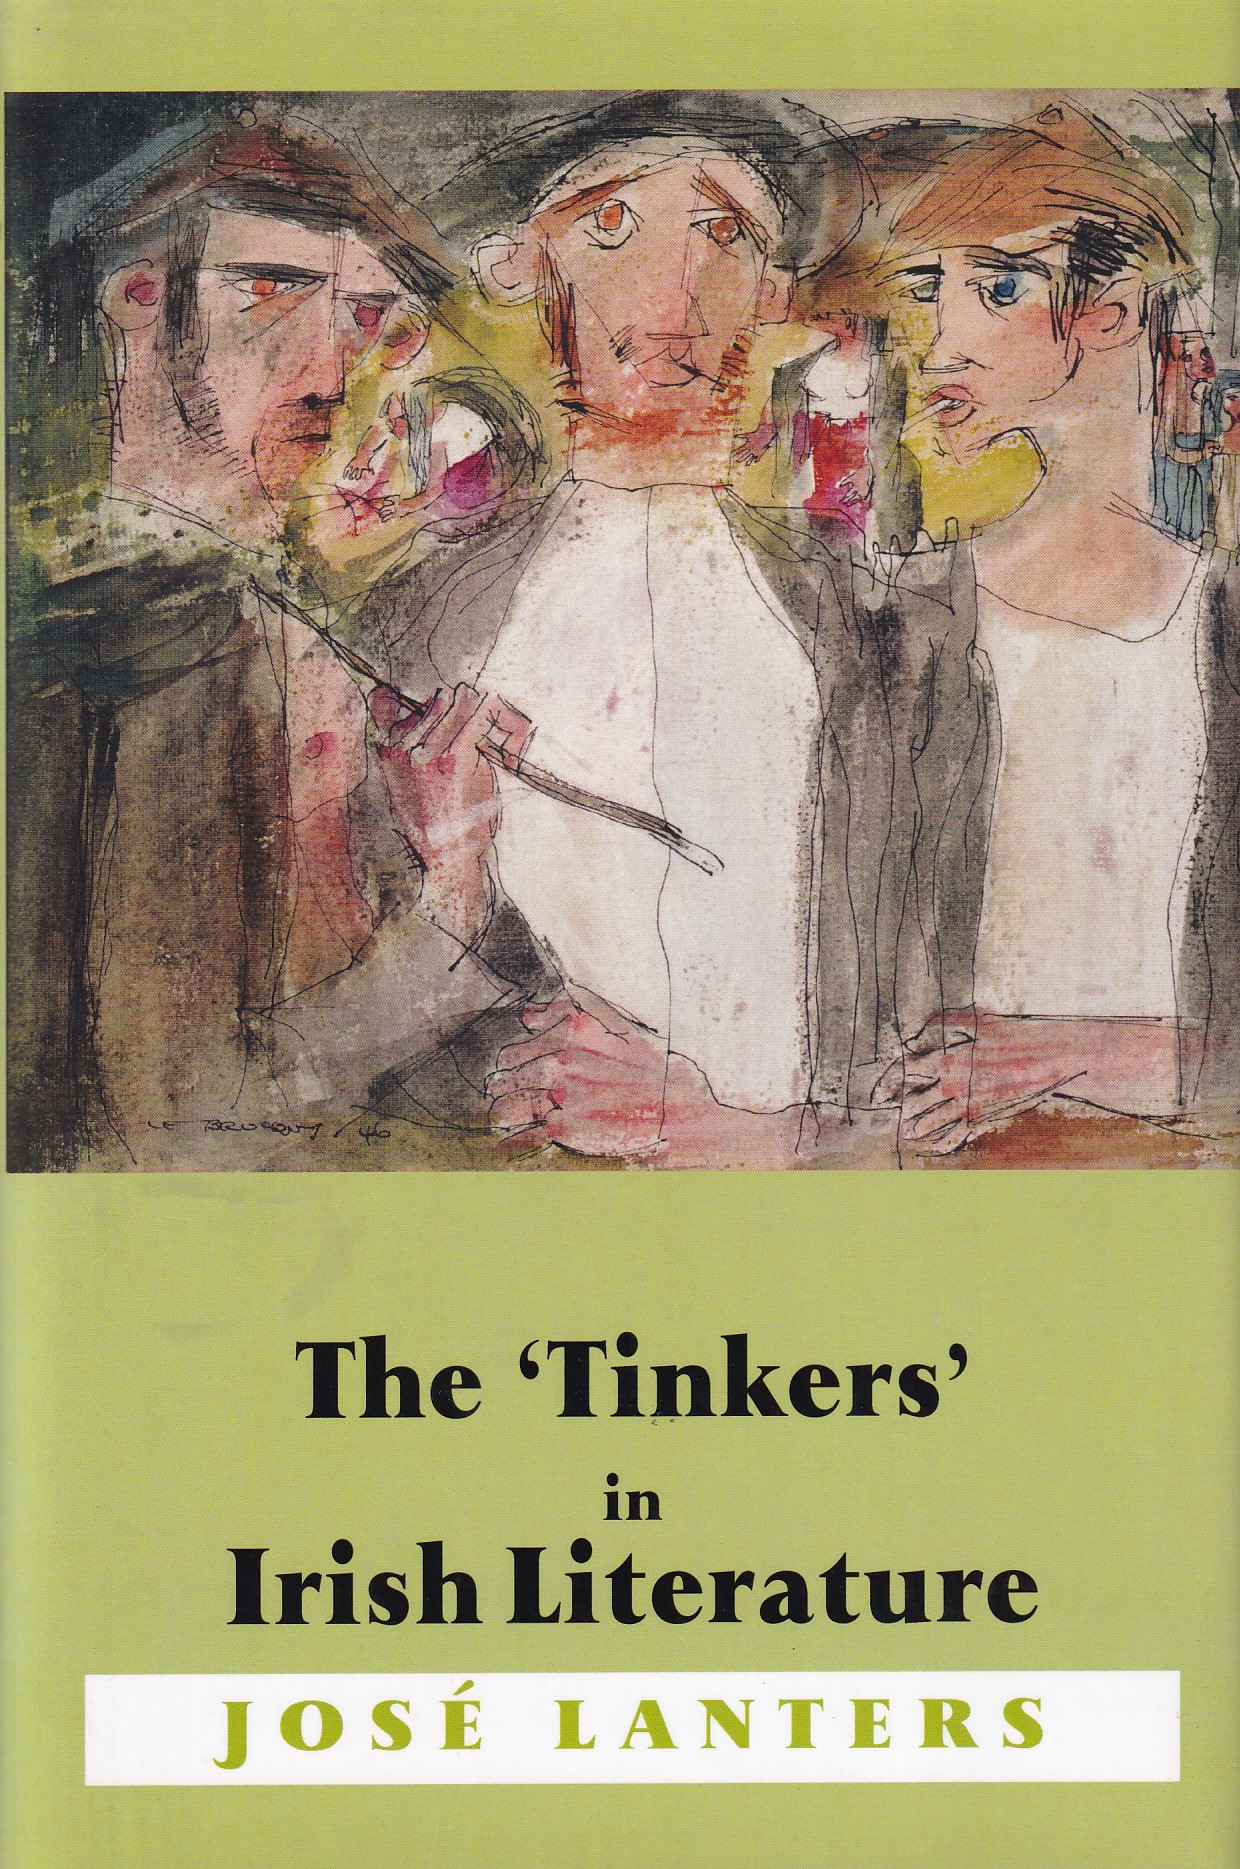 The ‘Tinkers’ in Irish Literature: Unsettled Subjects and the Construction of Difference by José Lanters